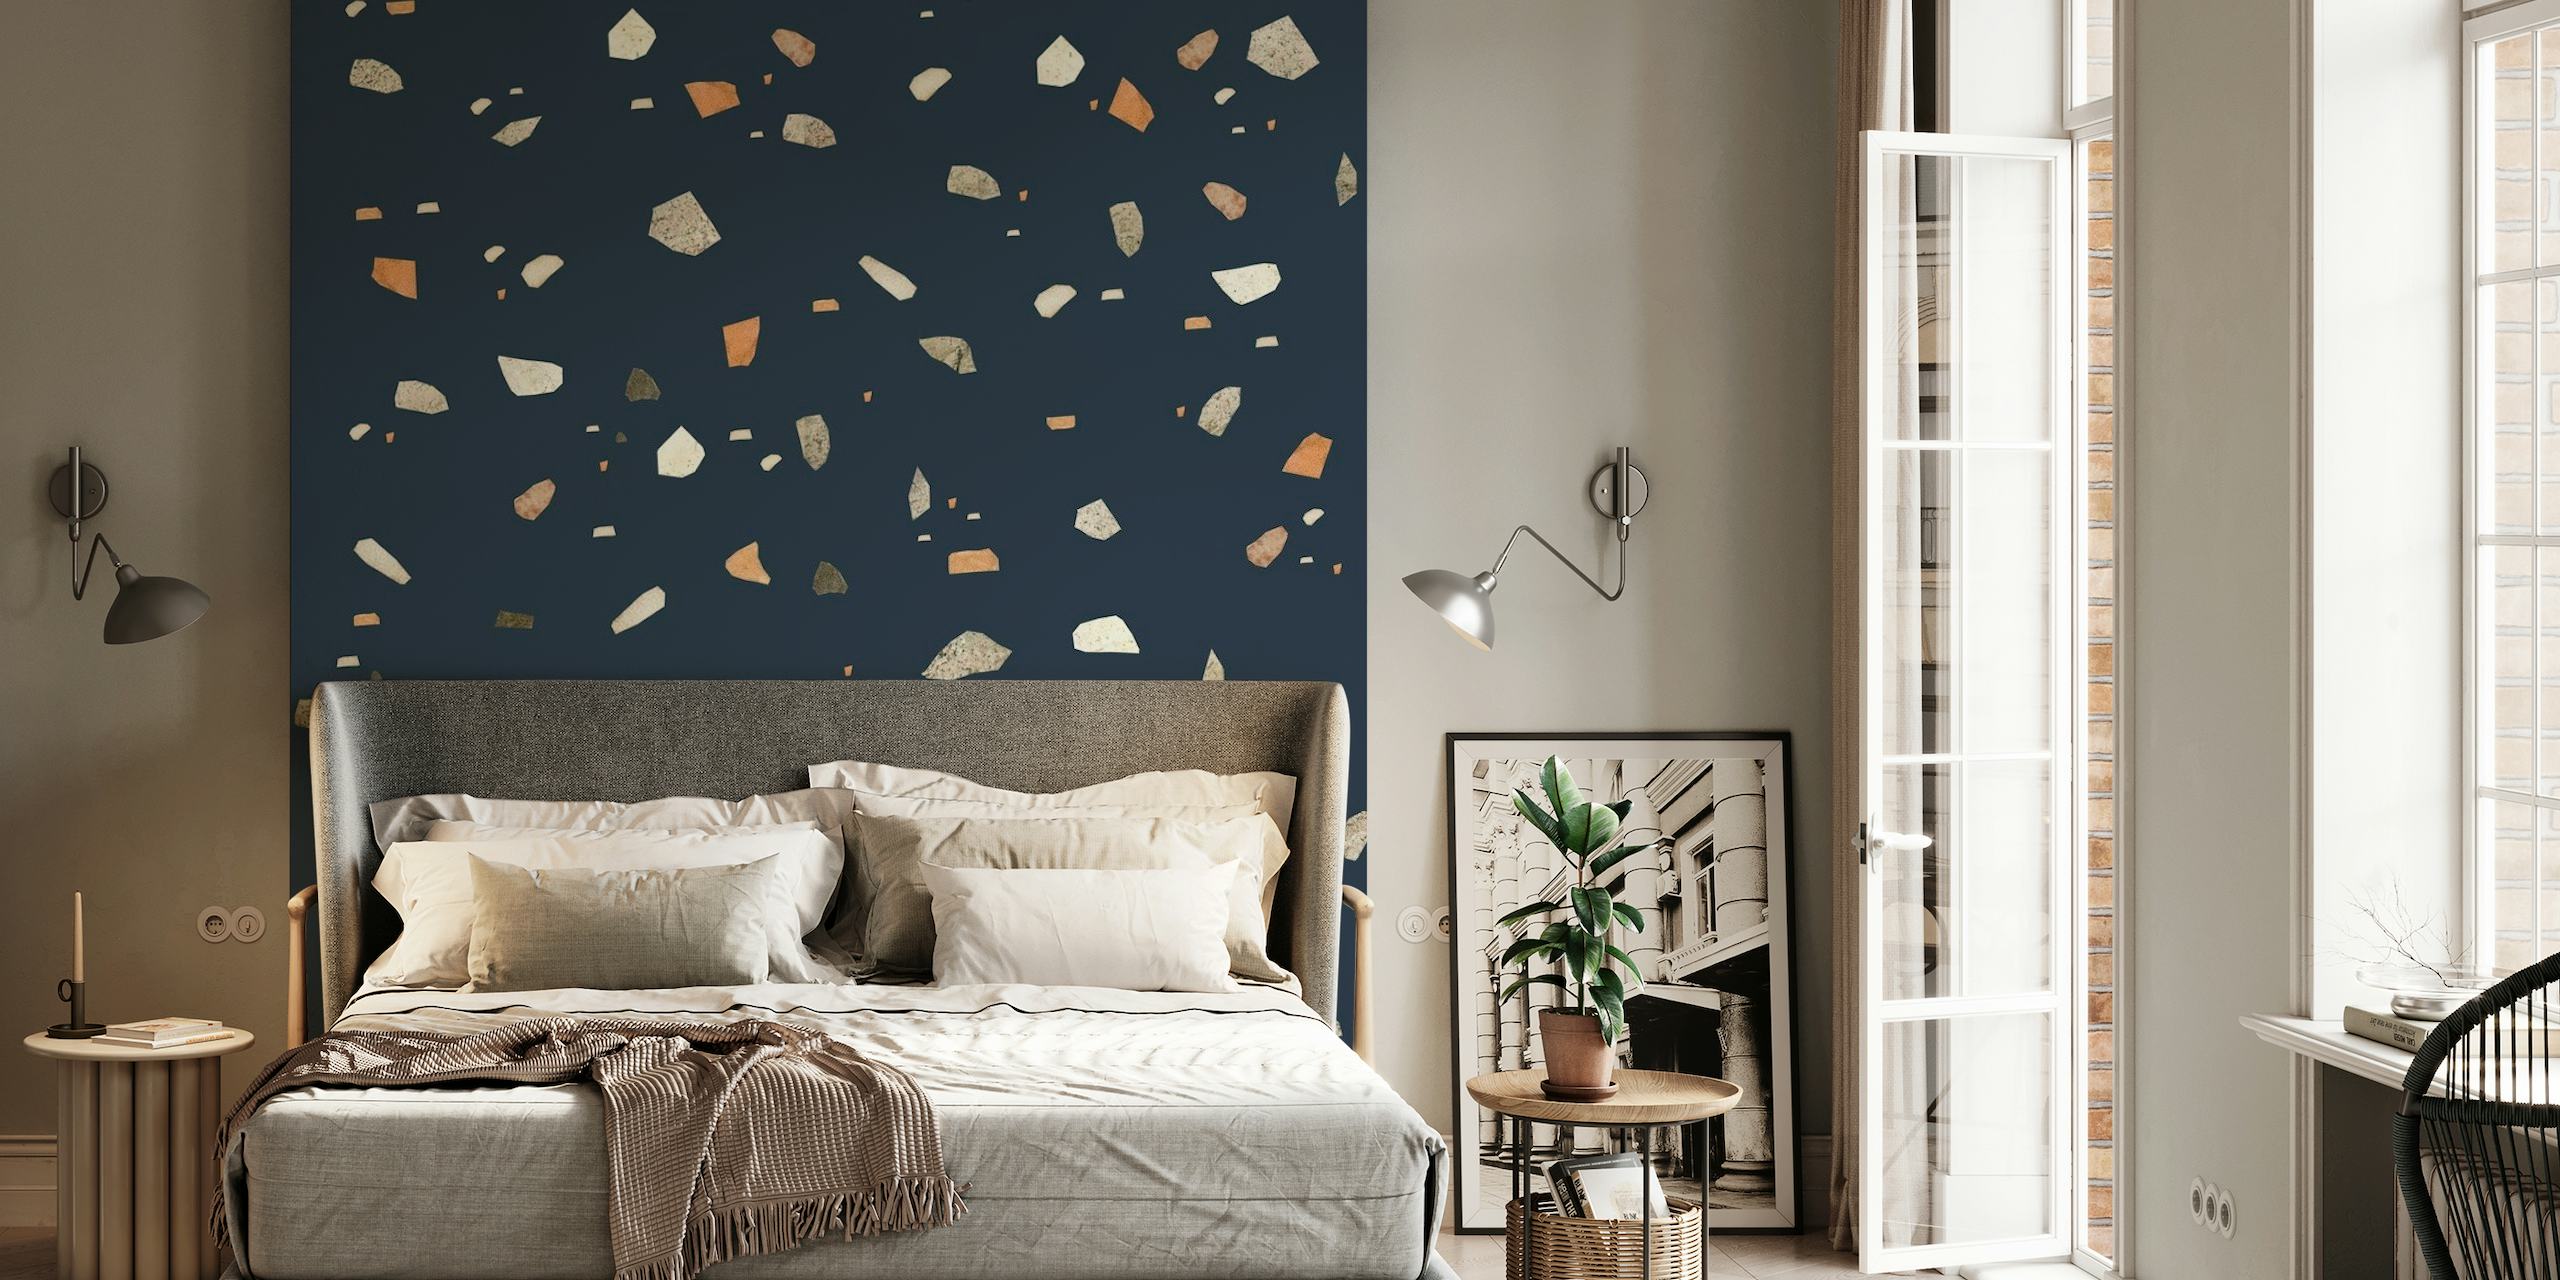 Midnight Navy Terrazzo patterned wall mural with neutral and earth-toned speckles on a dark blue background